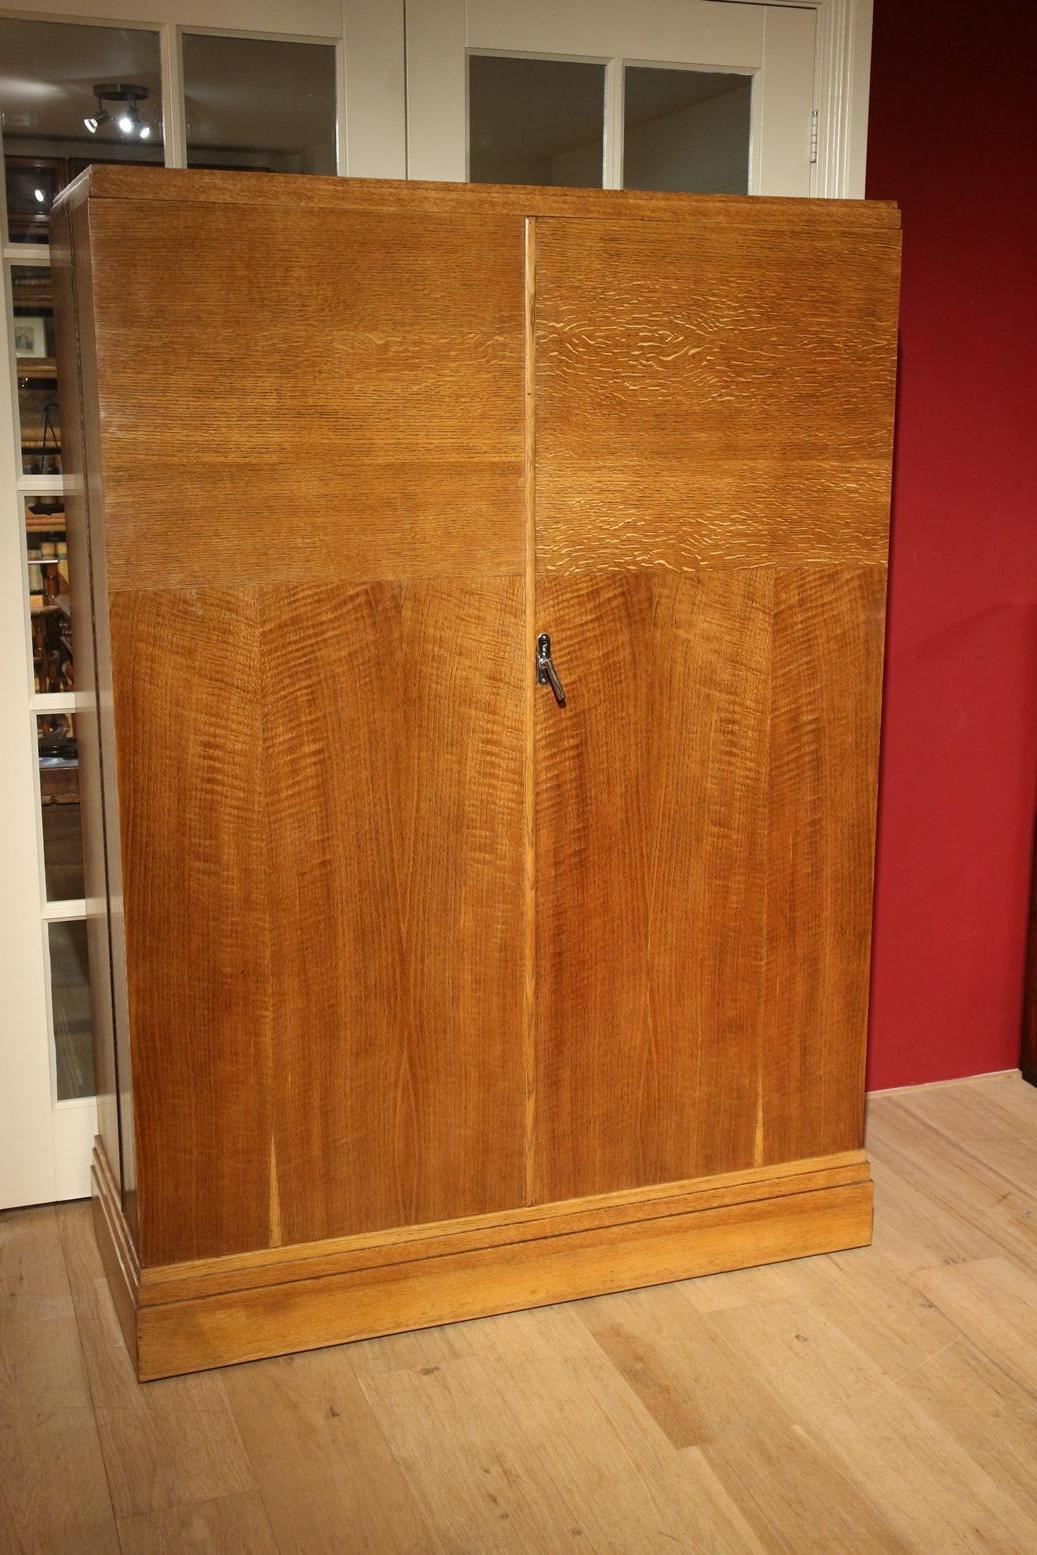 Compactom wardrobe with beautiful interior with a place for everything. Finished with beautiful interior with boxes, shelves, hangers, hooks and racks where everything has a place. The chrome on the inside is all in perfect condition. 

In a nice